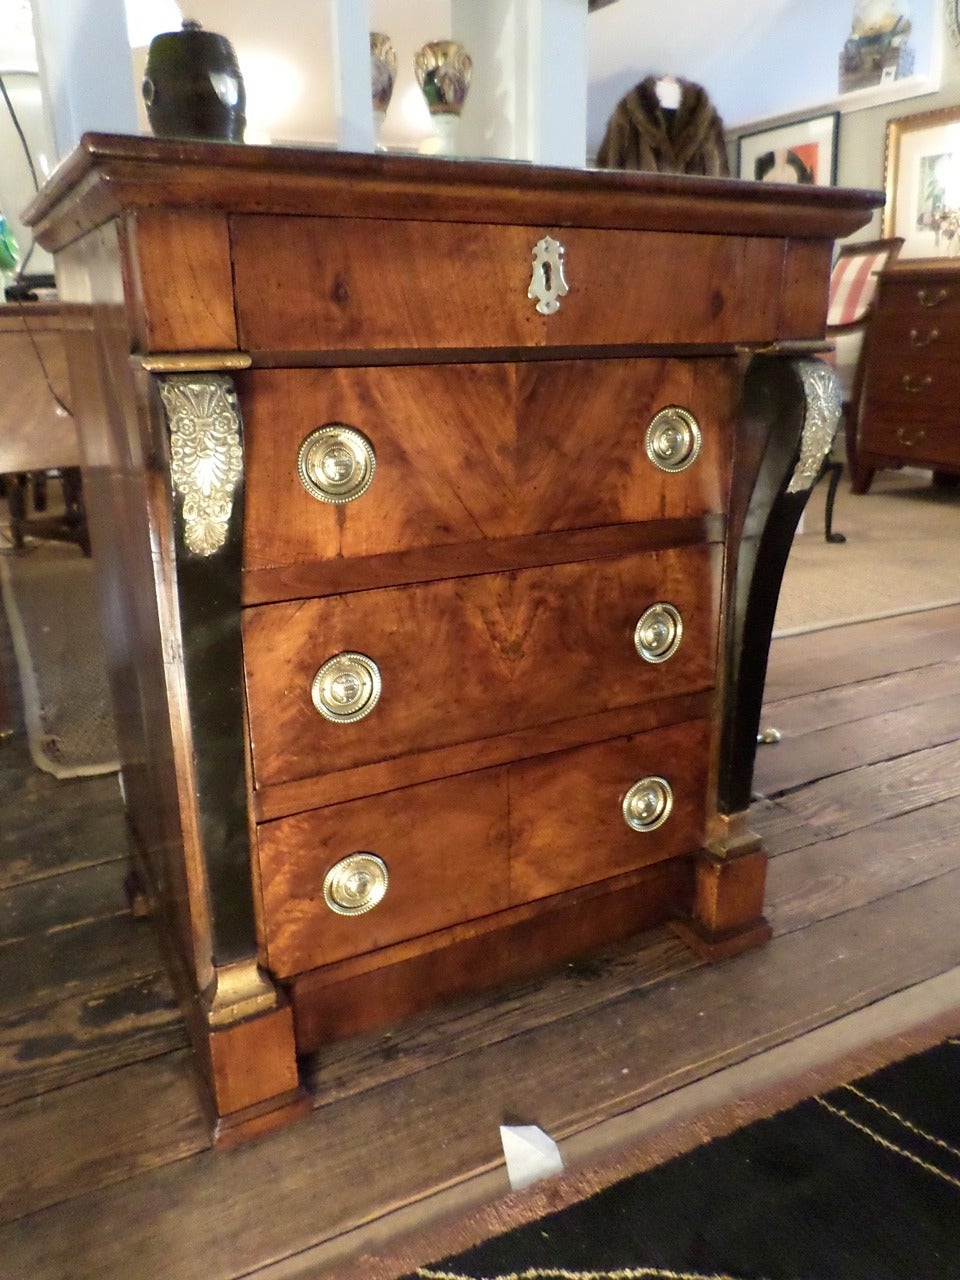 Diminutive French Empire mahogany chest of drawers, circa 1820, with a superb mellow patina, the overhanging top above four drawers flanked by curved ebonized pilasters with gilt accents on the capitals, all resting on a plinth base. Rare small